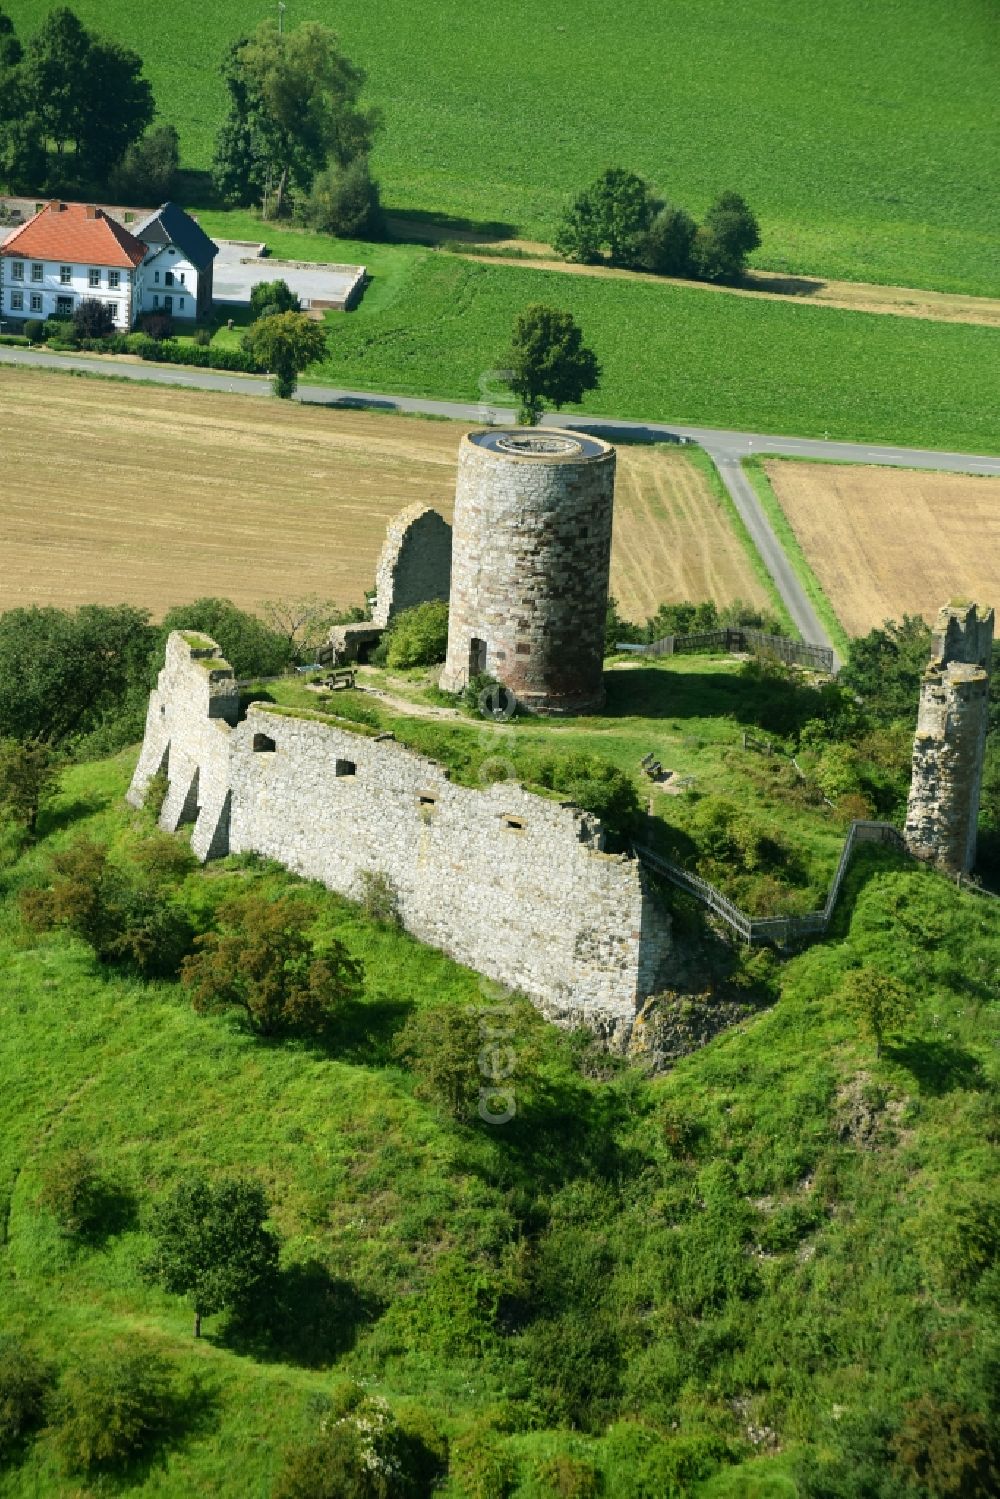 Warburg from above - Ruins and vestiges of the former castle and fortress Burgruine Desenberg in Warburg in the state North Rhine-Westphalia, Germany